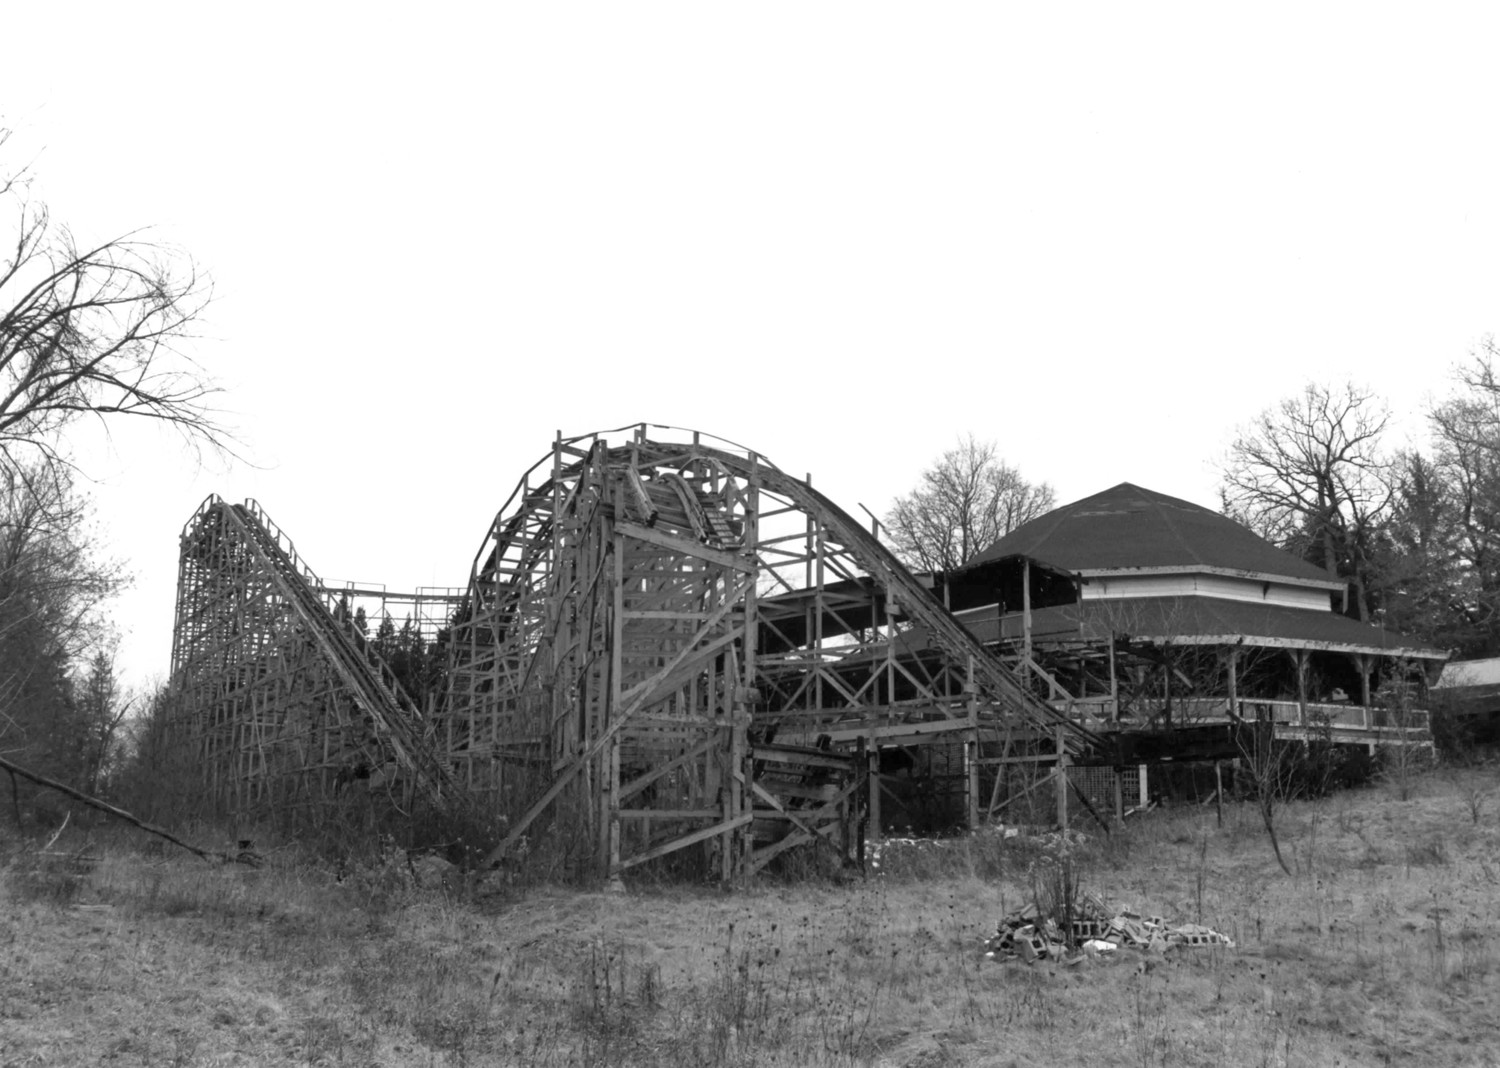 Wildcat roller coaster and the merry-go-round, looking northeast (1992)